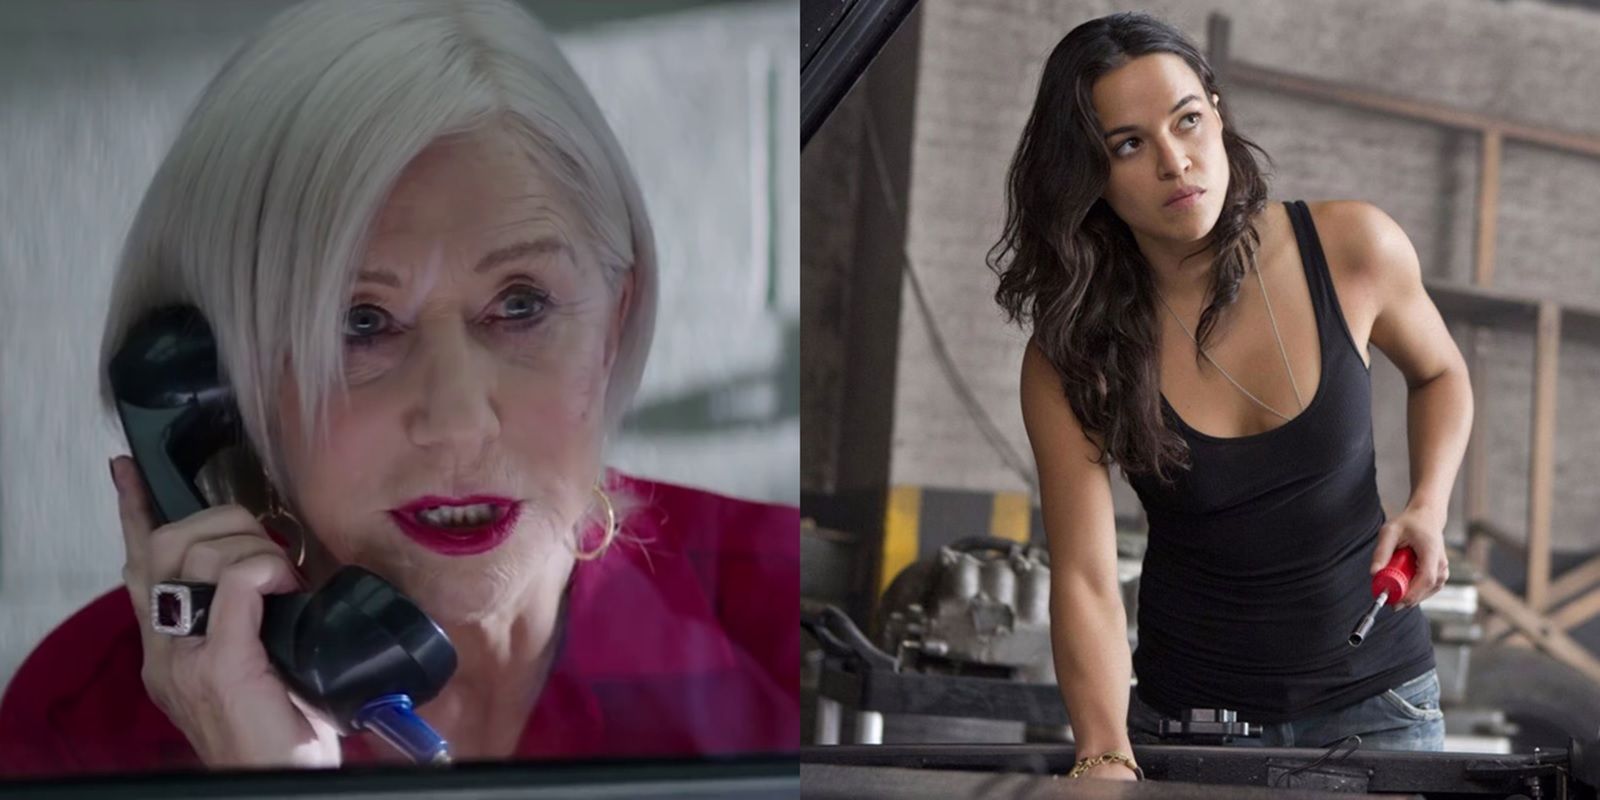 Helen Mirren as Magdalene Shaw and Michelle Rodriguez as Letty Ortiz